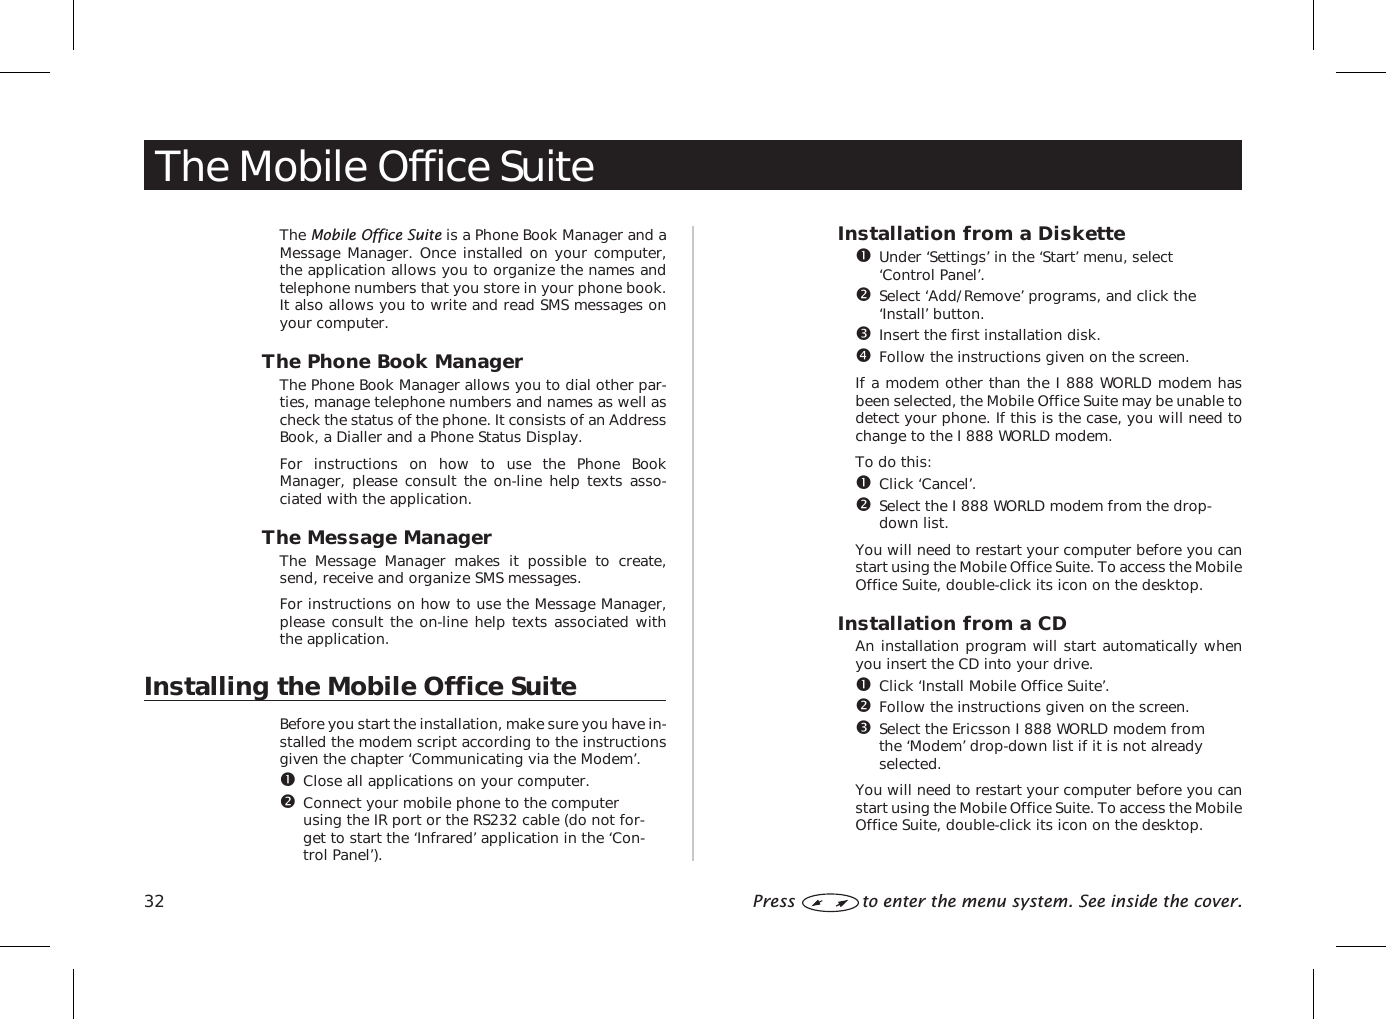 The Mobile Office SuiteThe Mobile Office Suite is a Phone Book Manager and aMessage Manager. Once installed on your computer,the application allows you to organize the names andtelephone numbers that you store in your phone book.It also allows you to write and read SMS messages onyour computer.The Phone Book ManagerThe Phone Book Manager allows you to dial other par-ties, manage telephone numbers and names as well ascheck the status of the phone. It consists of an AddressBook, a Dialler and a Phone Status Display.For instructions on how to use the Phone BookManager, please consult the on-line help texts asso-ciated with the application.The Message ManagerThe Message Manager makes it possible to create,send, receive and organize SMS messages.For instructions on how to use the Message Manager,please consult the on-line help texts associated withthe application.Installing the Mobile Office SuiteBefore you start the installation, make sure you have in-stalled the modem script according to the instructionsgiven the chapter ‘Communicating via the Modem’.Close all applications on your computer.Connect your mobile phone to the computerusing the IR port or the RS232 cable (do not for-get to start the ‘Infrared’ application in the ‘Con-trol Panel’).Installation from a DisketteUnder ‘Settings’ in the ‘Start’ menu, select‘Control Panel’.Select ‘Add/Remove’ programs, and click the‘Install’ button.Insert the first installation disk.Follow the instructions given on the screen.If a modem other than the I 888 WORLD modem hasbeen selected, the Mobile Office Suite may be unable todetect your phone. If this is the case, you will need tochange to the I 888 WORLD modem.To do this:Click ‘Cancel’.Select the I 888 WORLD modem from the drop-down list.You will need to restart your computer before you canstart using the Mobile Office Suite. To access the MobileOffice Suite, double-click its icon on the desktop.Installation from a CDAn installation program will start automatically whenyou insert the CD into your drive.Click ‘Install Mobile Office Suite’.Follow the instructions given on the screen.Select the Ericsson I 888 WORLD modem fromthe ‘Modem’ drop-down list if it is not alreadyselected.You will need to restart your computer before you canstart using the Mobile Office Suite. To access the MobileOffice Suite, double-click its icon on the desktop.32 Press to enter the menu system. See inside the cover.